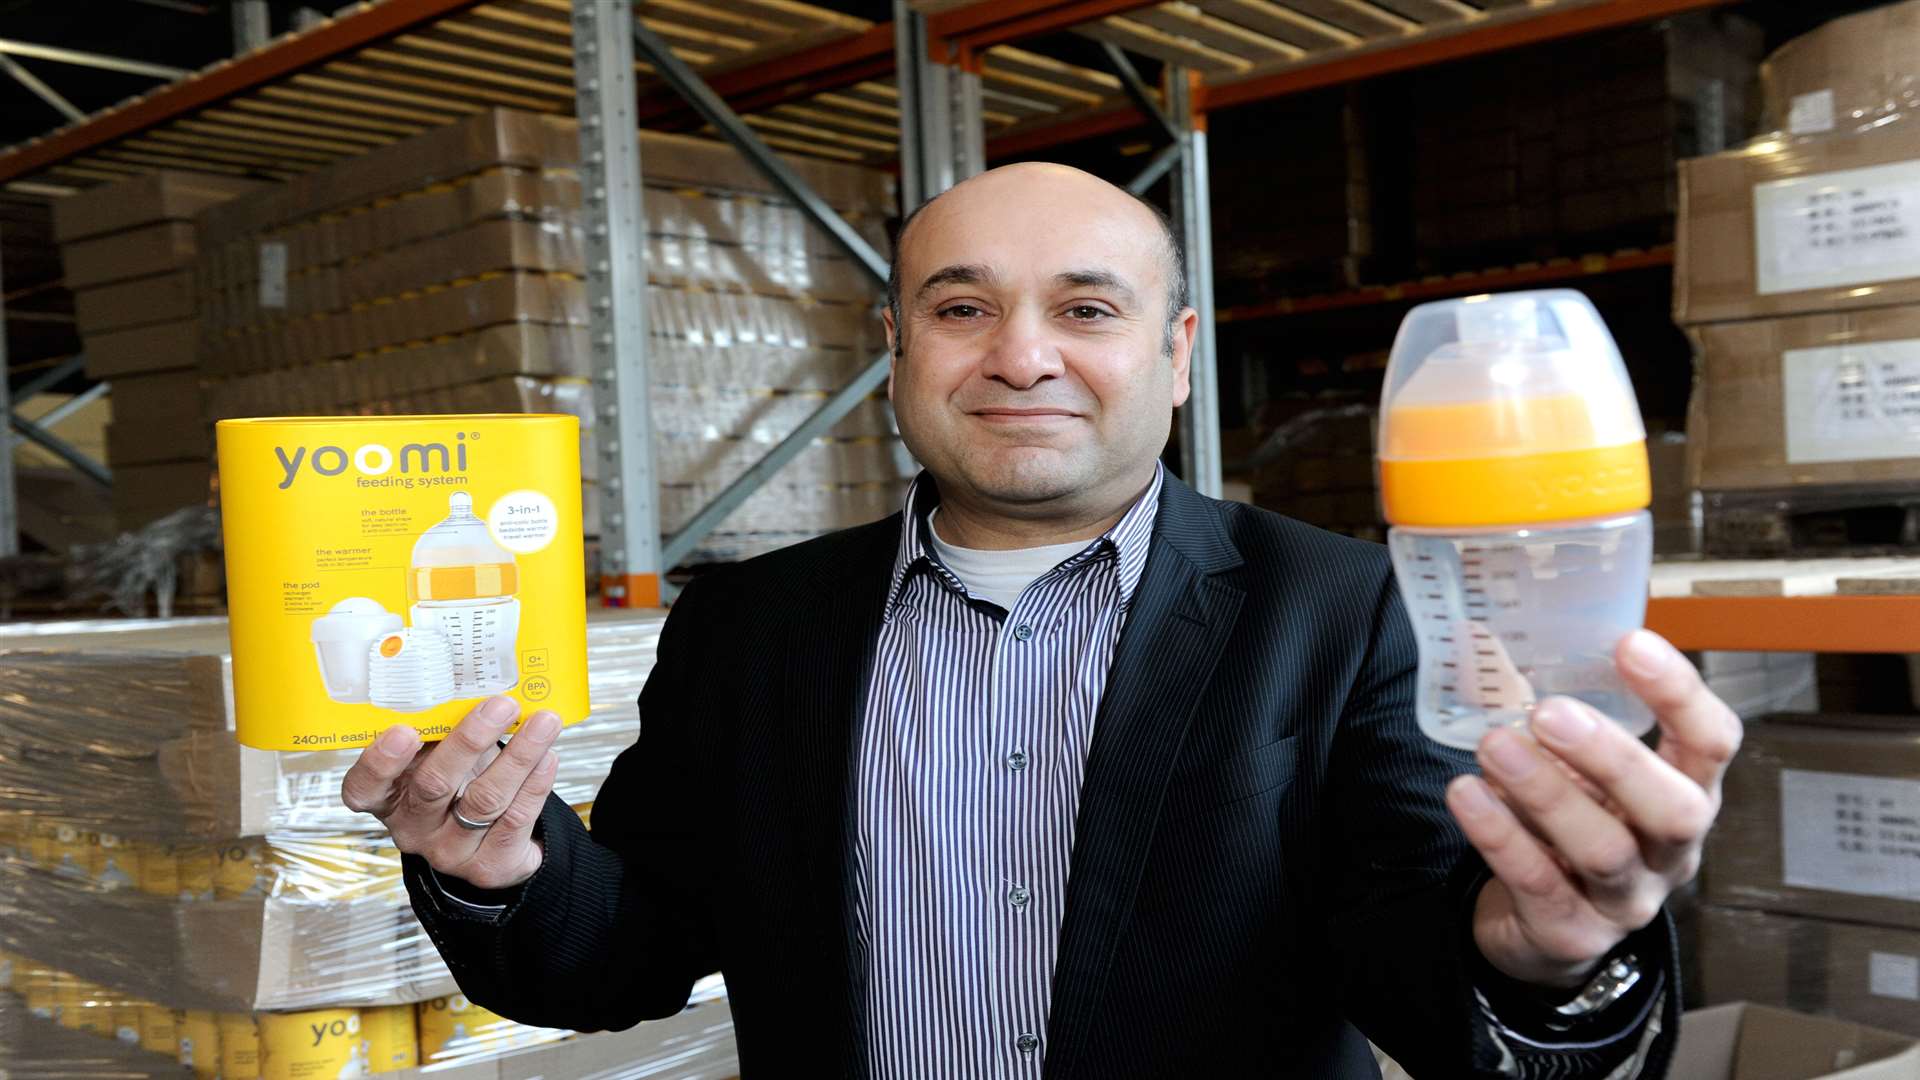 Jim Shaikh has just moved his baby bottle manufacturer to Dartford from Woolwich